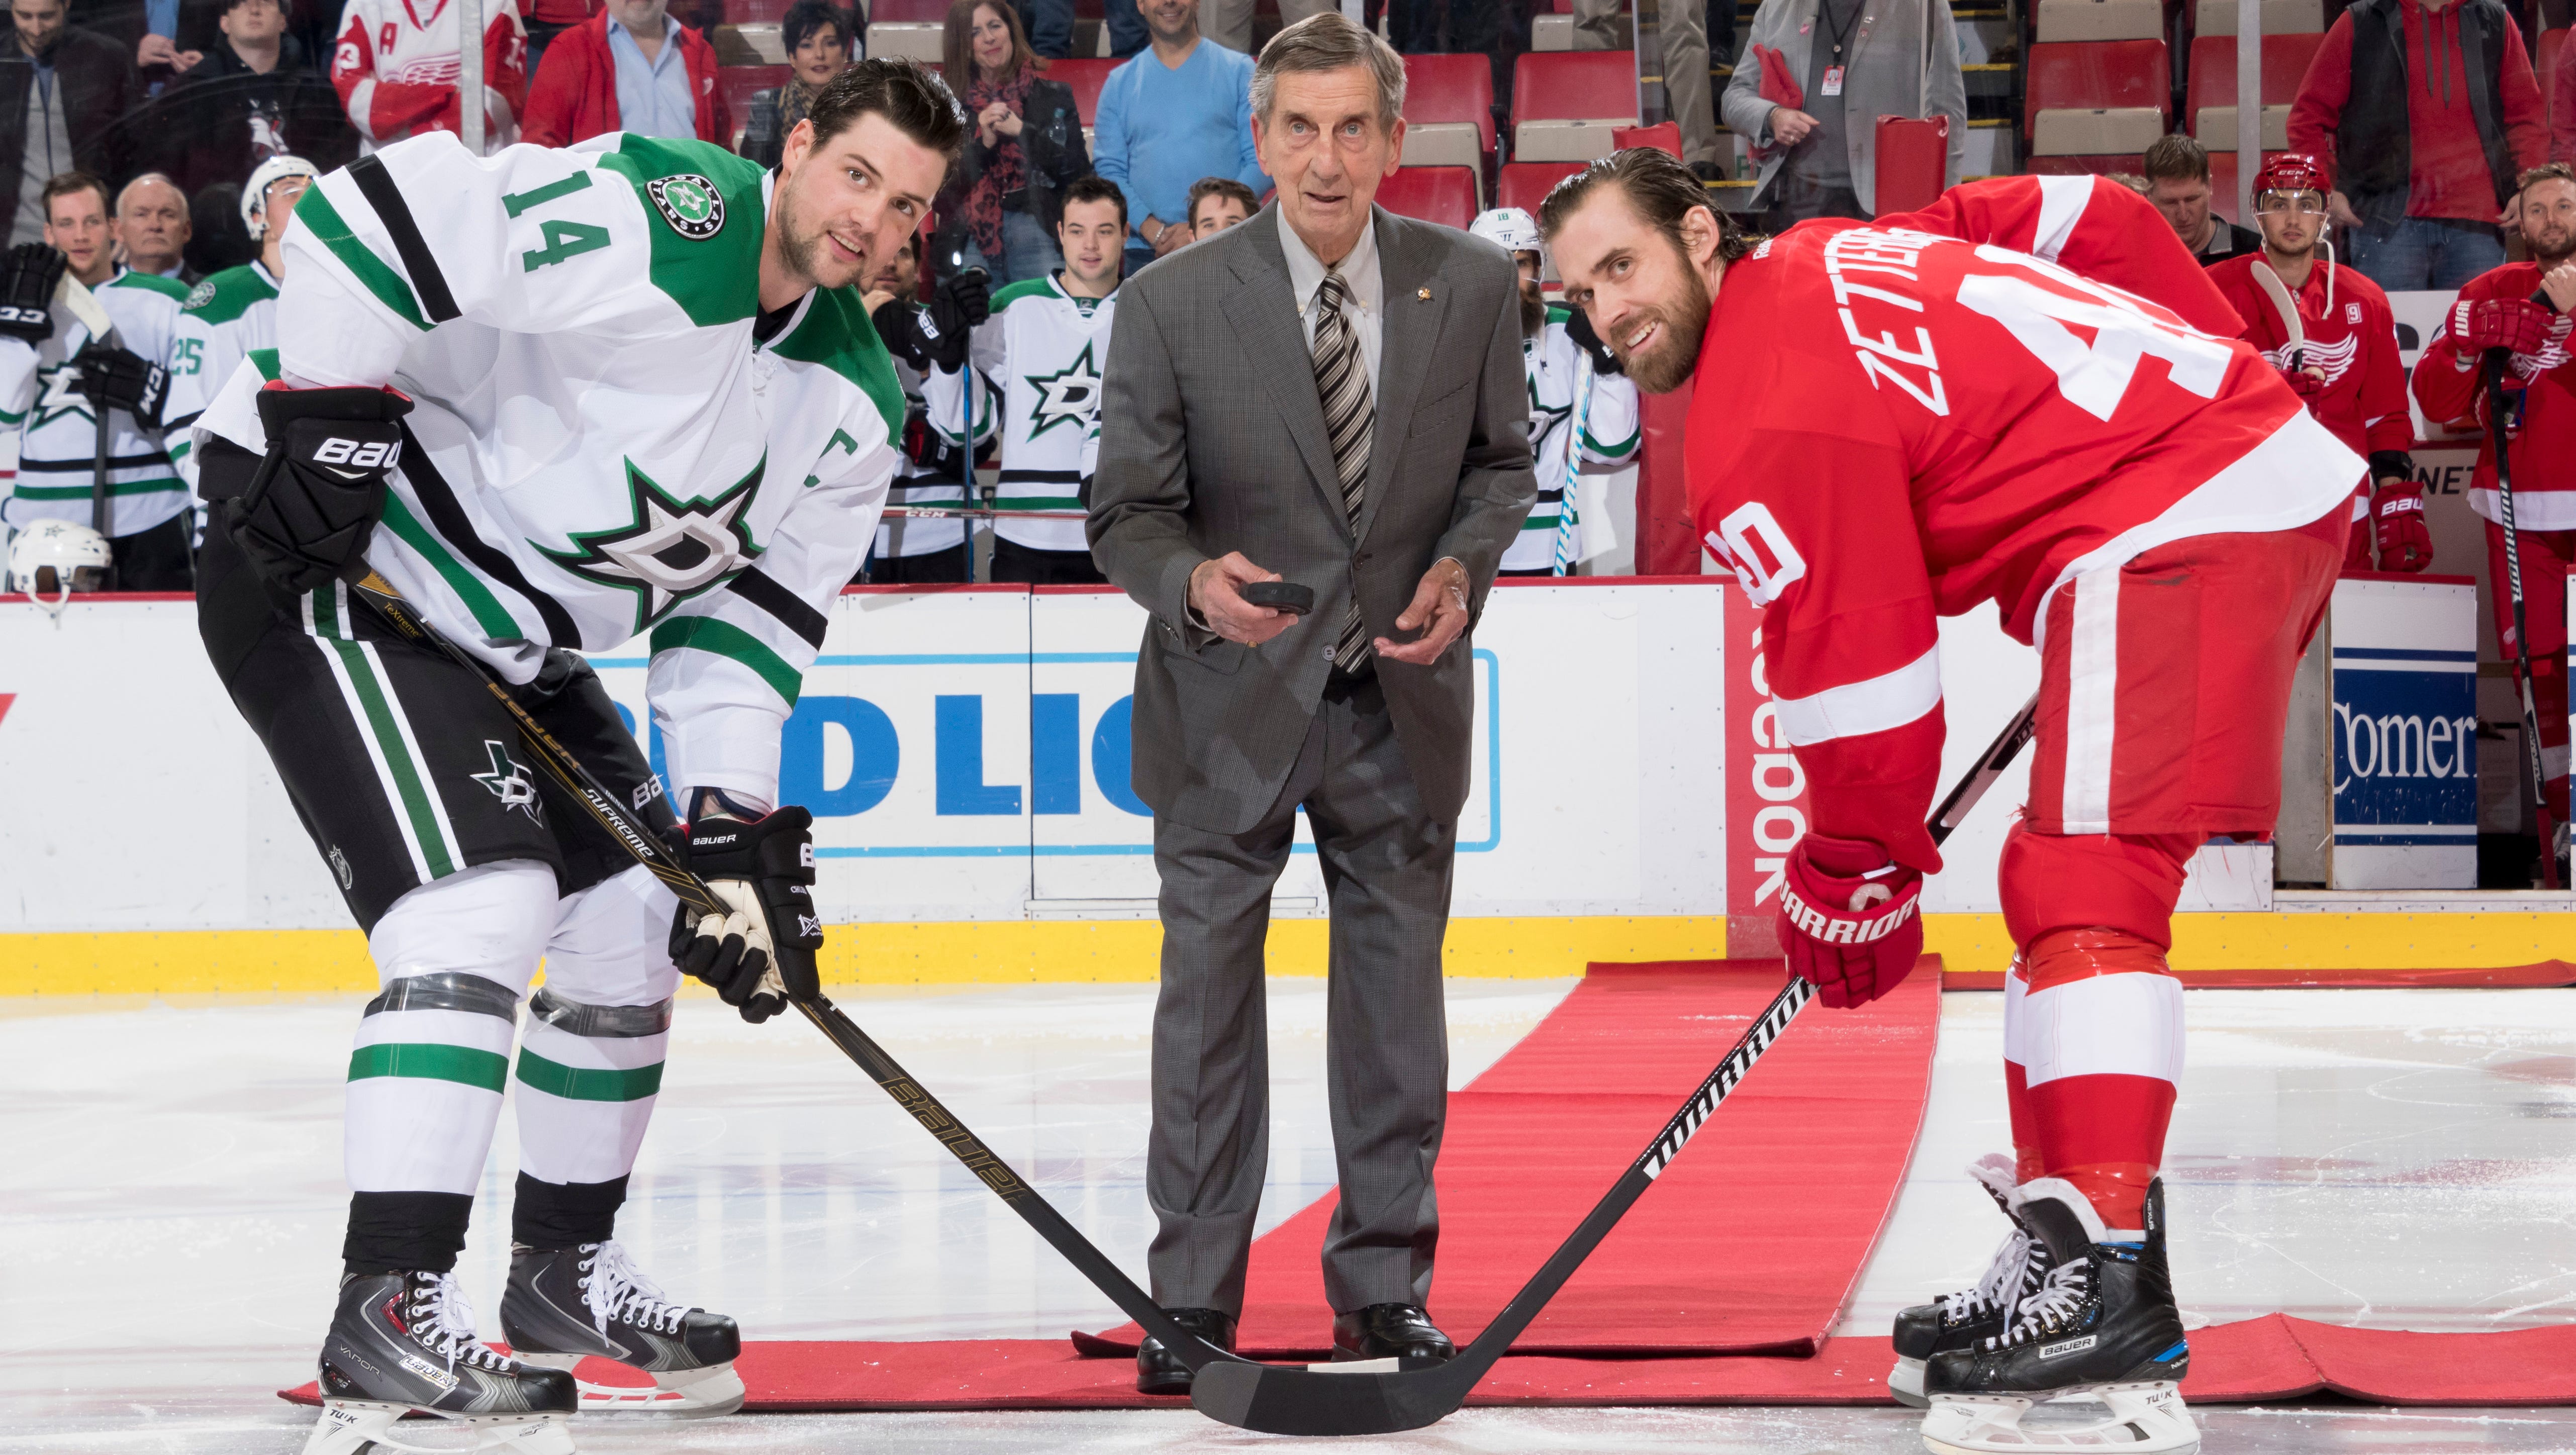 Red Wing Hall of Famer Ted Lindsay performs a ceremonial puck drop with Dallas left wing Jamie Benn and Detroit left wing Henrik Zetterberg before the start of the game.